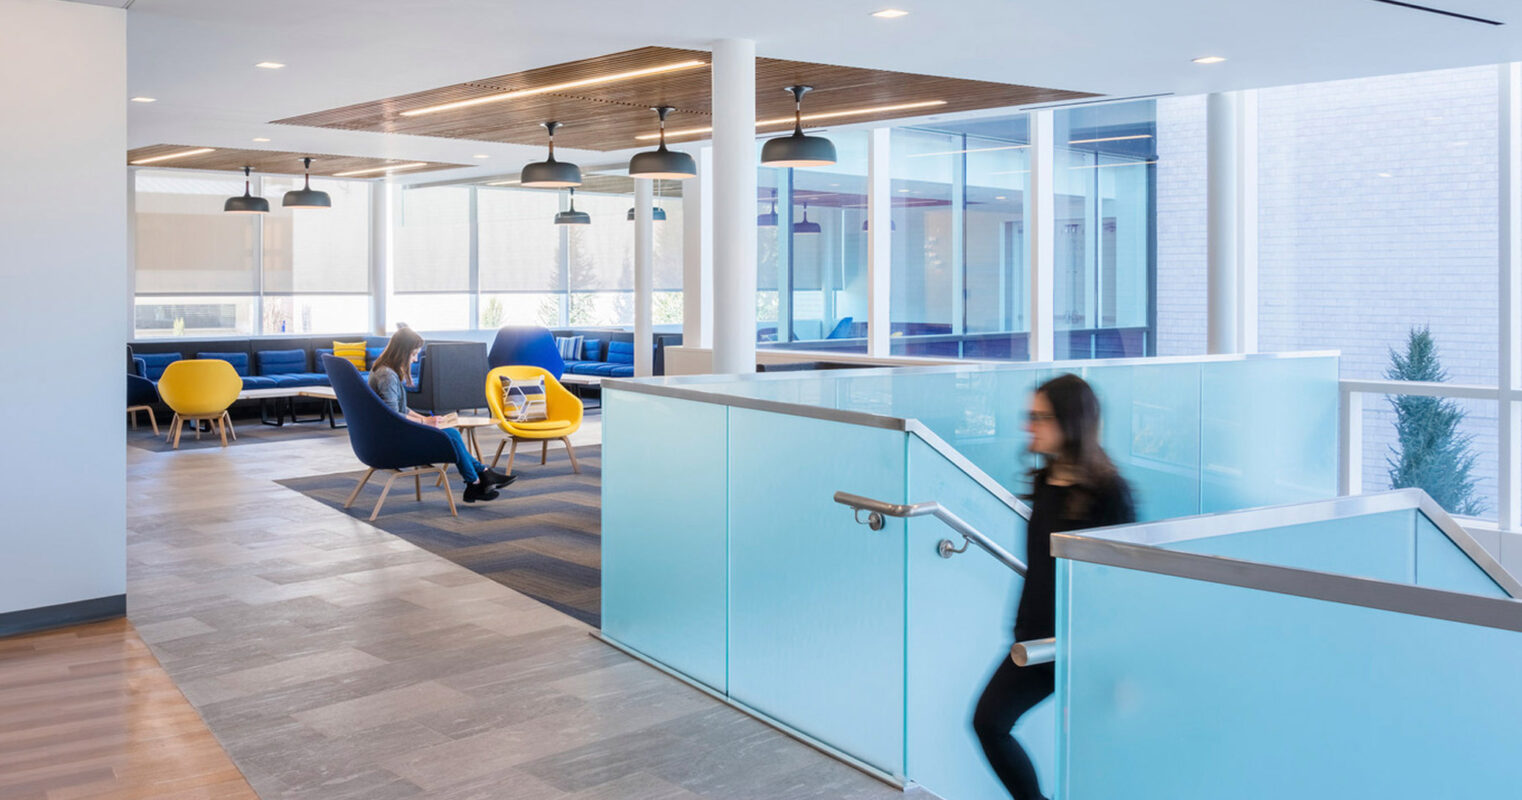 Modern office space with an open floor plan featuring clean lines, glass partitions, and a muted color palette with strategic accents of bright blue and yellow. Pendant lighting and contemporary furnishings create a sophisticated yet inviting work environment.